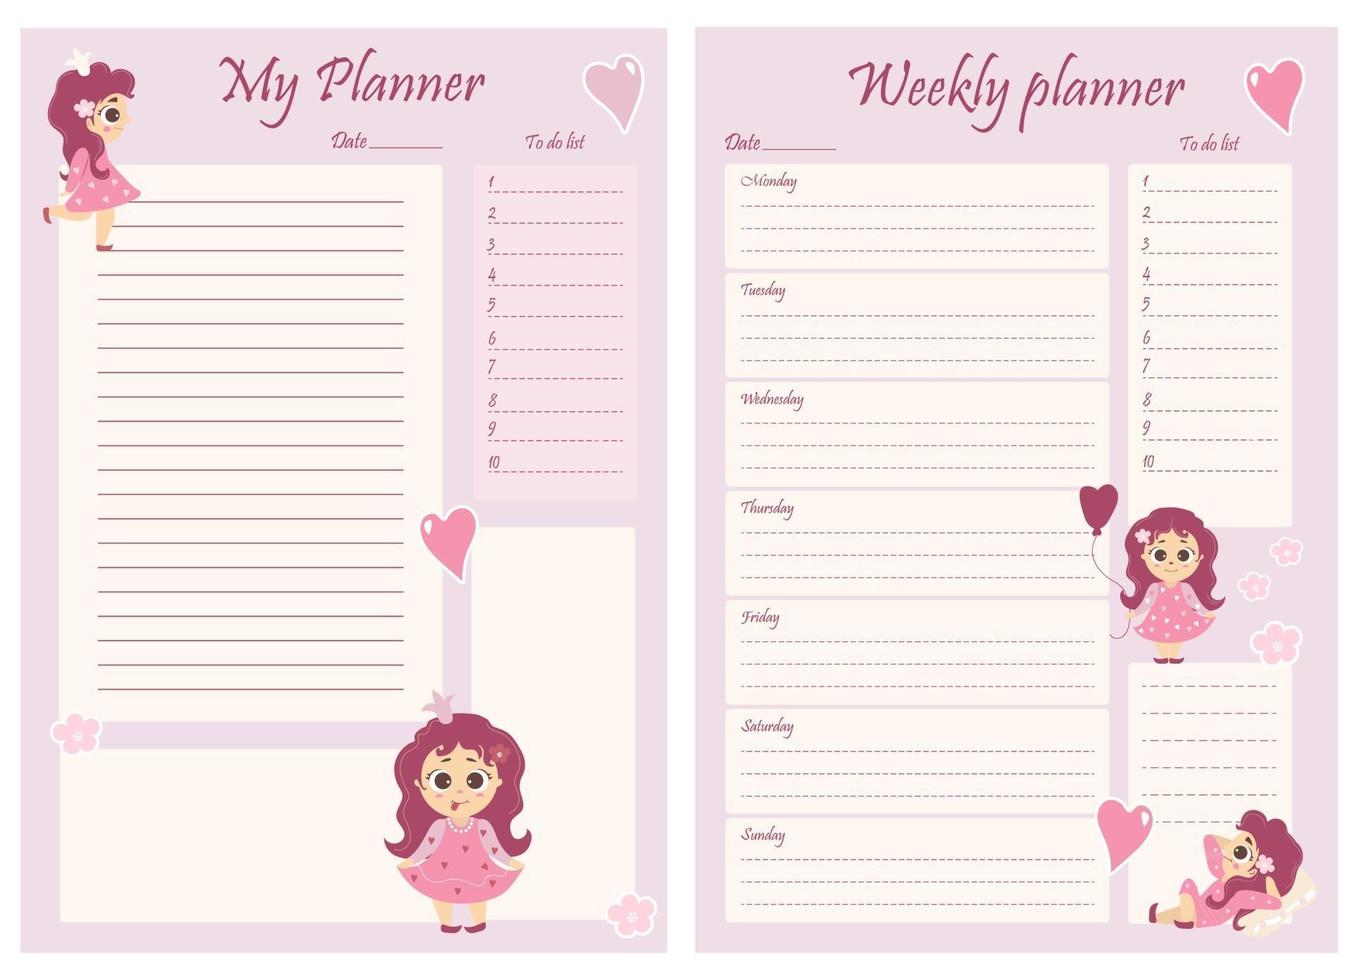 Cute girl planner templates - for a day, a week, a to-do list and a place to take notes. Organizer and schedule with notes and to-do list. Beautiful girl princess with flowers and balloons. Vector. A4 vector